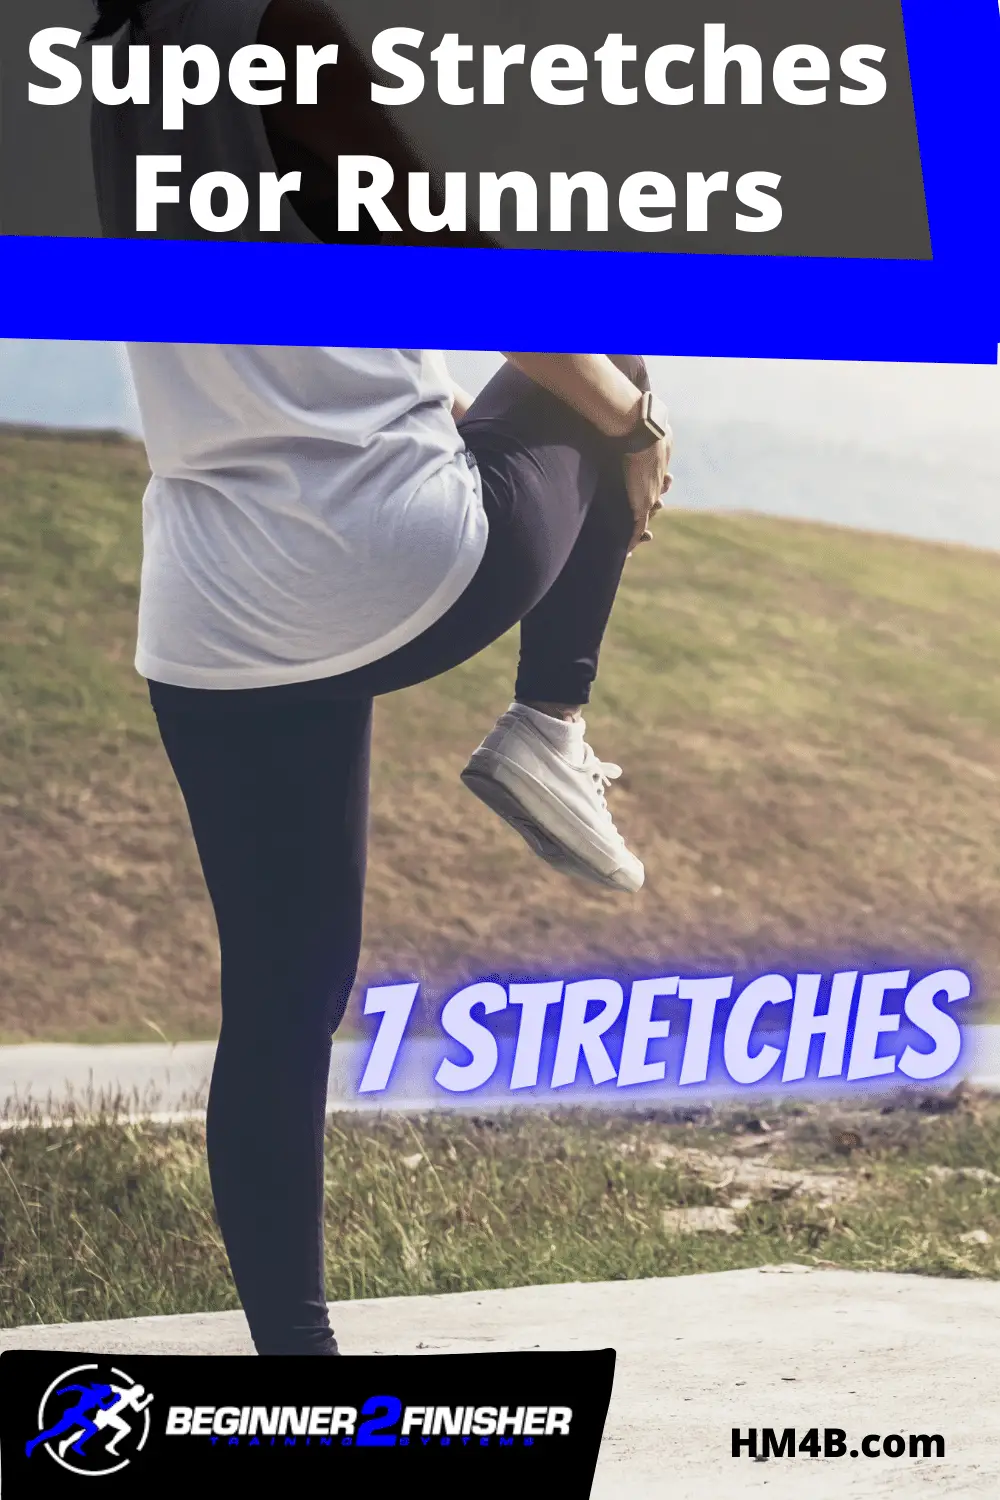 What Type Of Stretching Should Runners Perform?